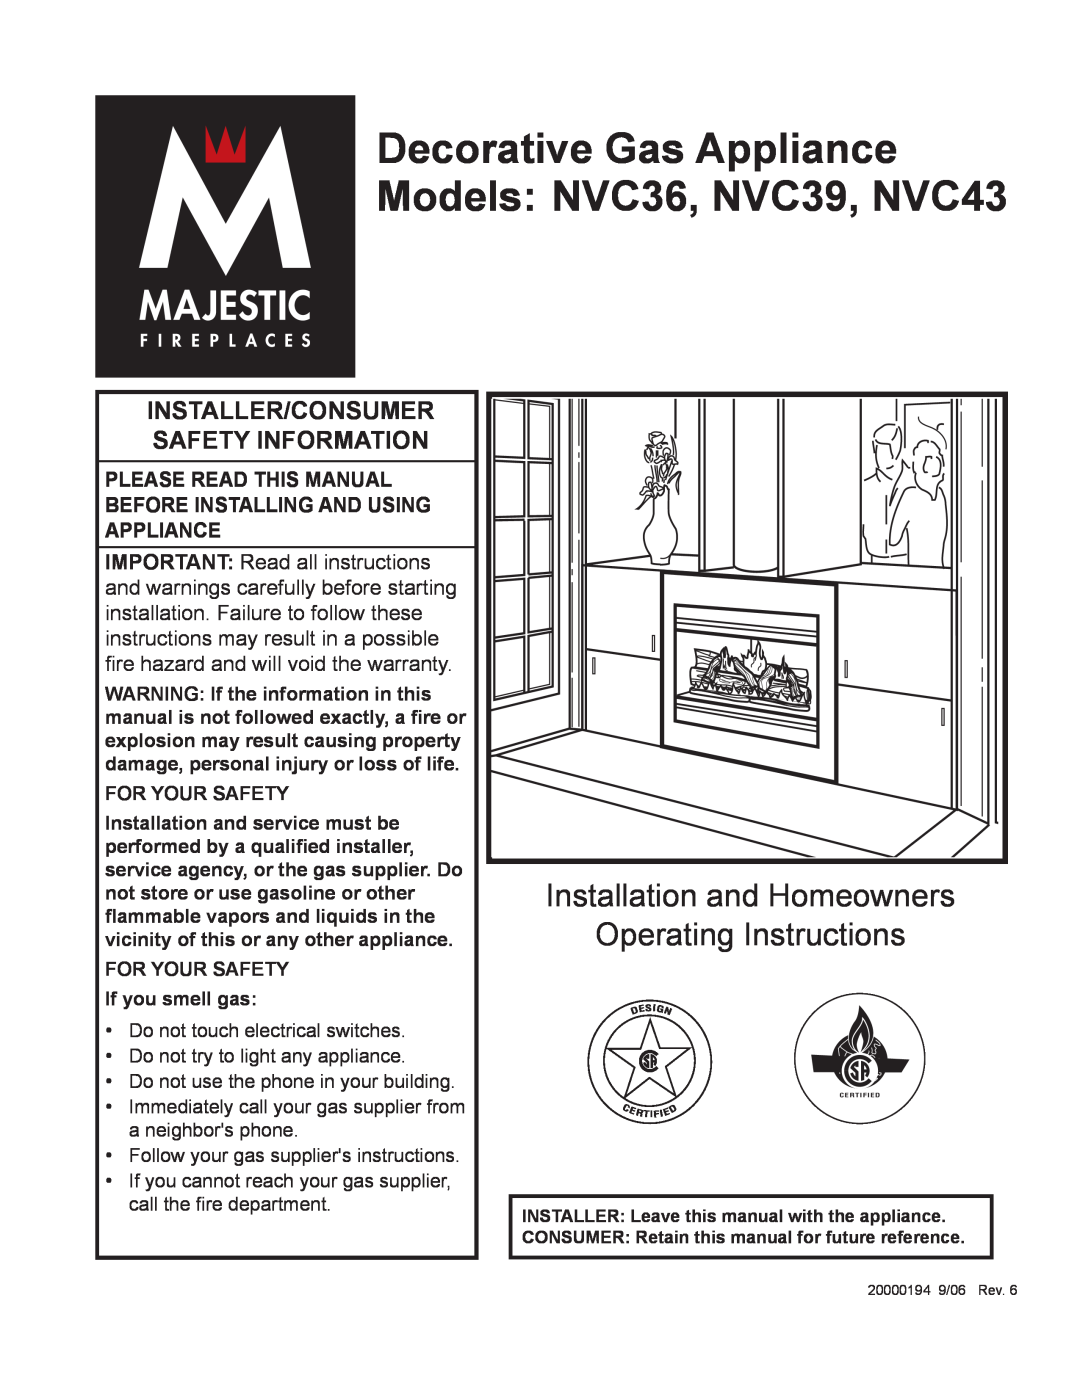 Vermont Casting NVC43 warranty Installation and Homeowners, Operating Instructions, Installer/Consumer Safety Information 